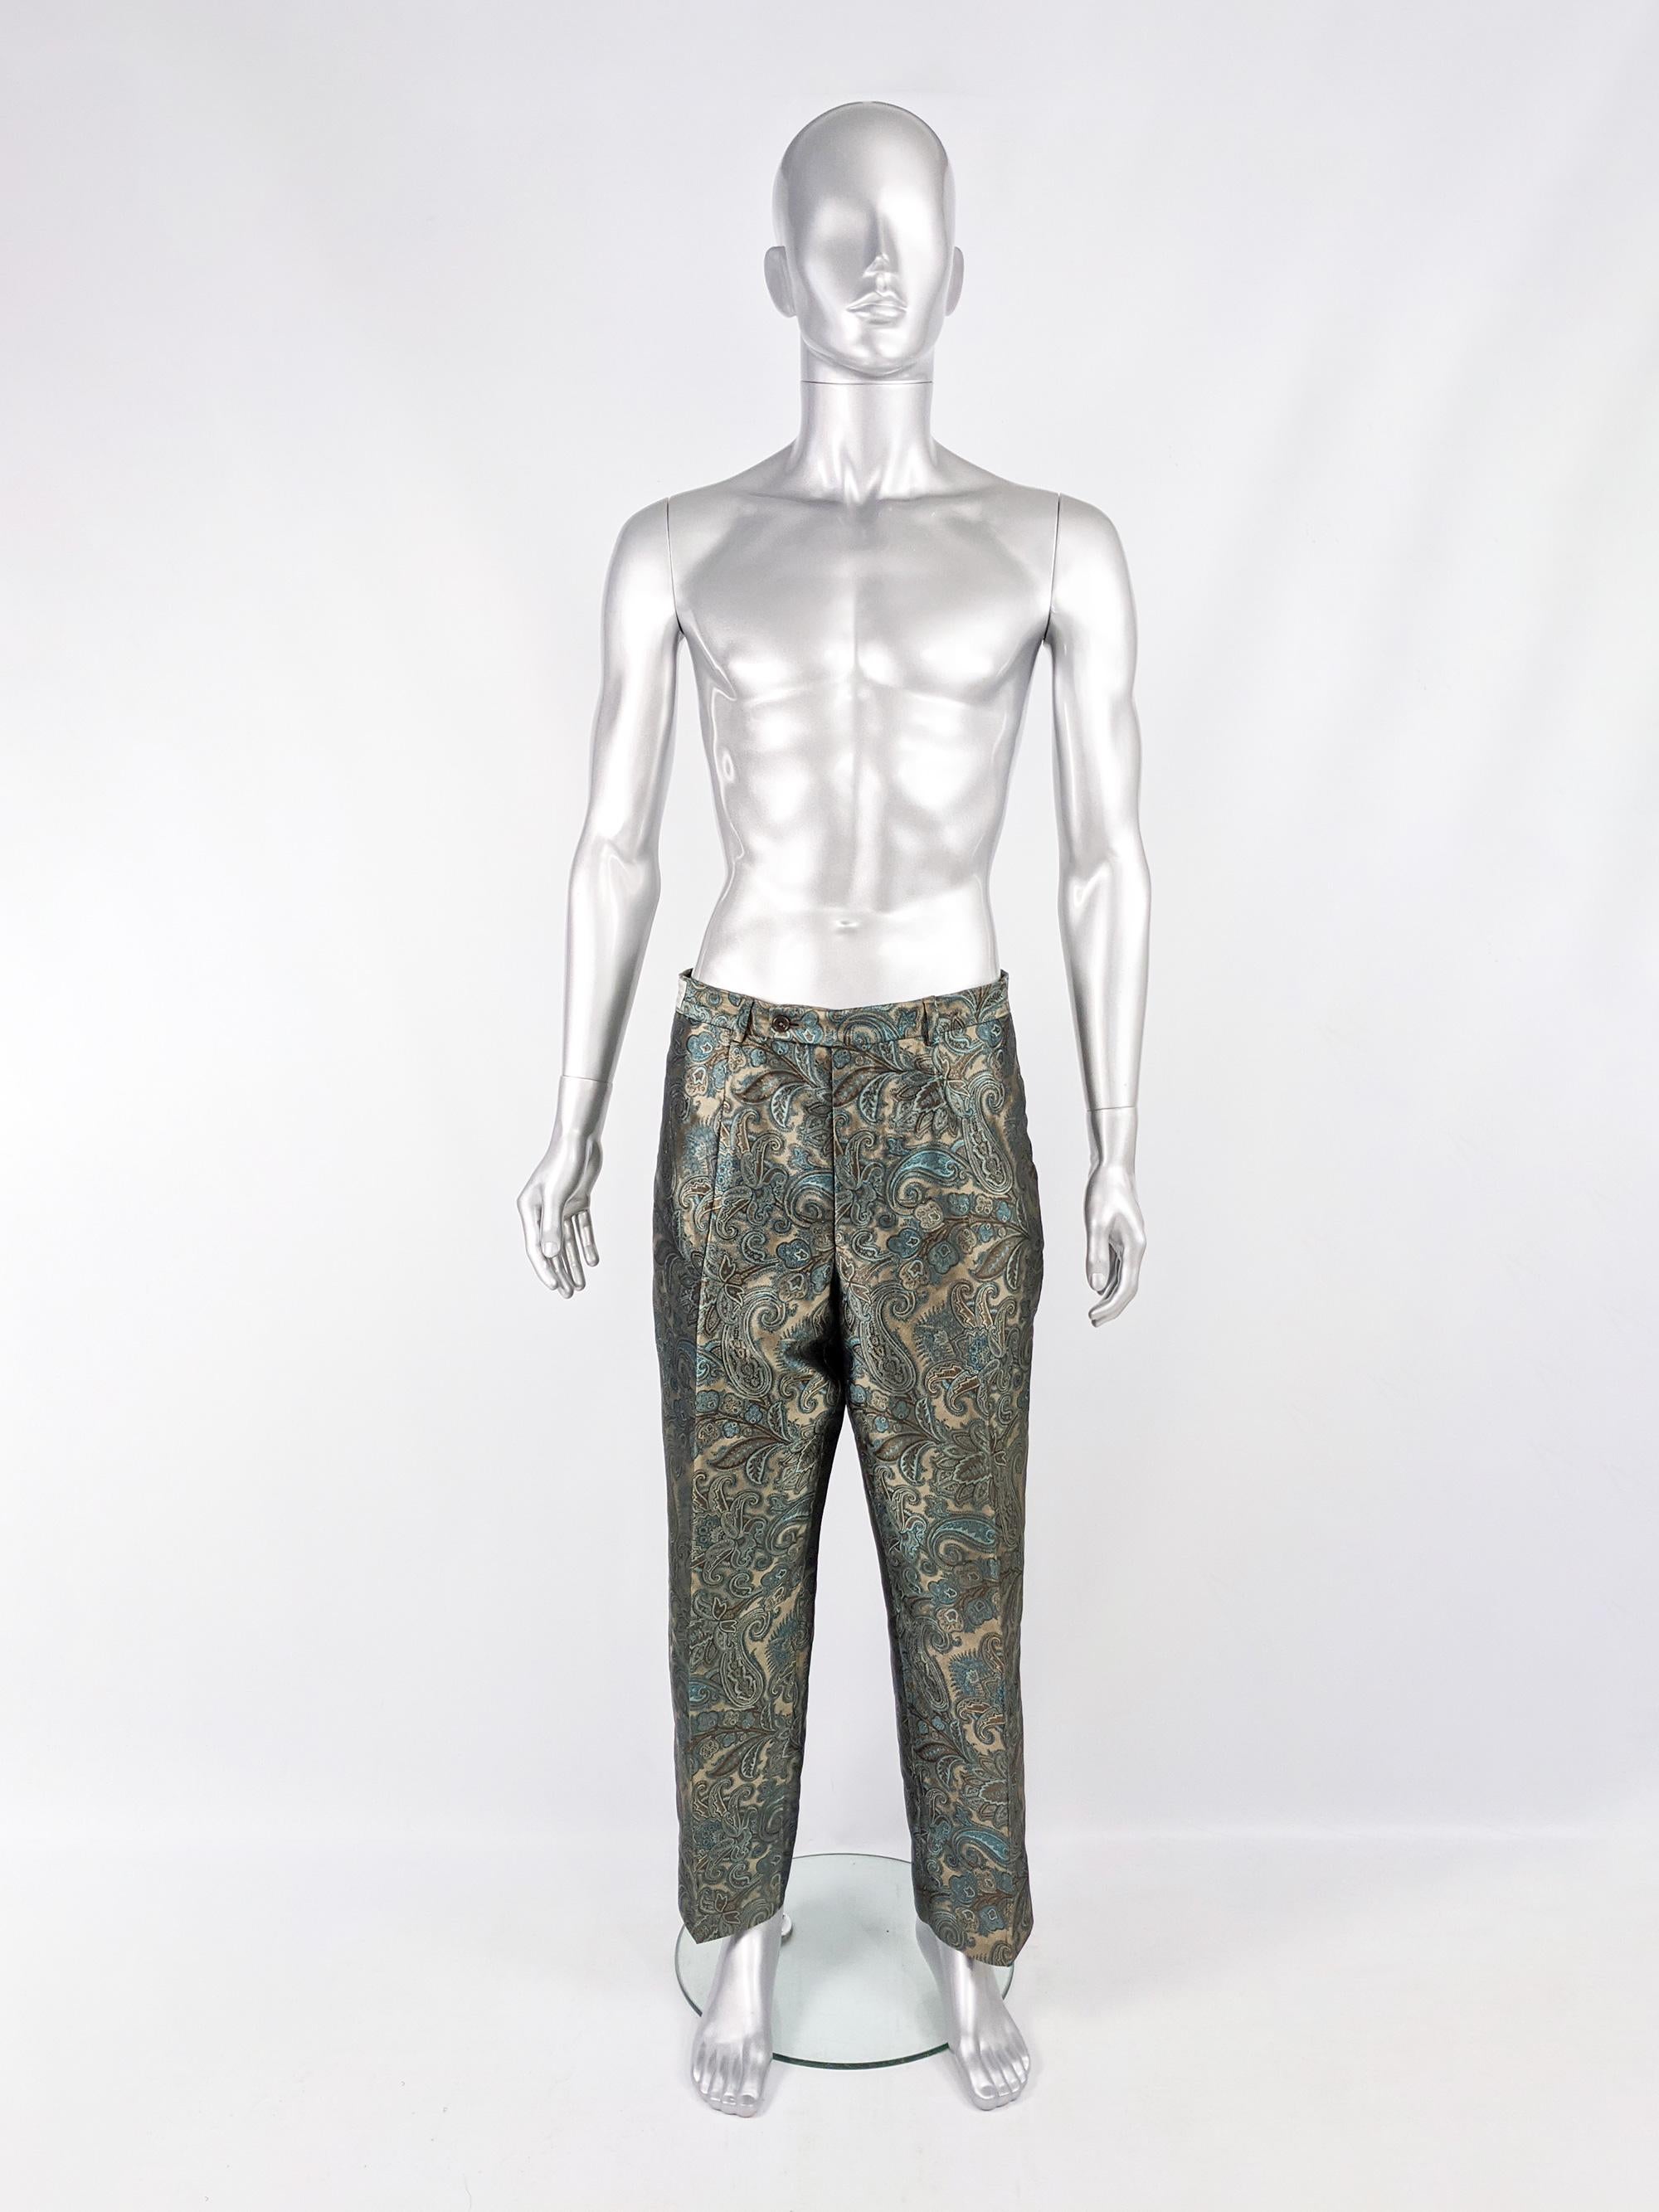 An excellent pair of vintage mens trousers from the 90s by luxury British fashion designer, Tomasz Starzewski who was famous for dressing royals (like Princess Diana) and actors alike. Made in Italy, in a bold green and muted gold pure silk jacquard